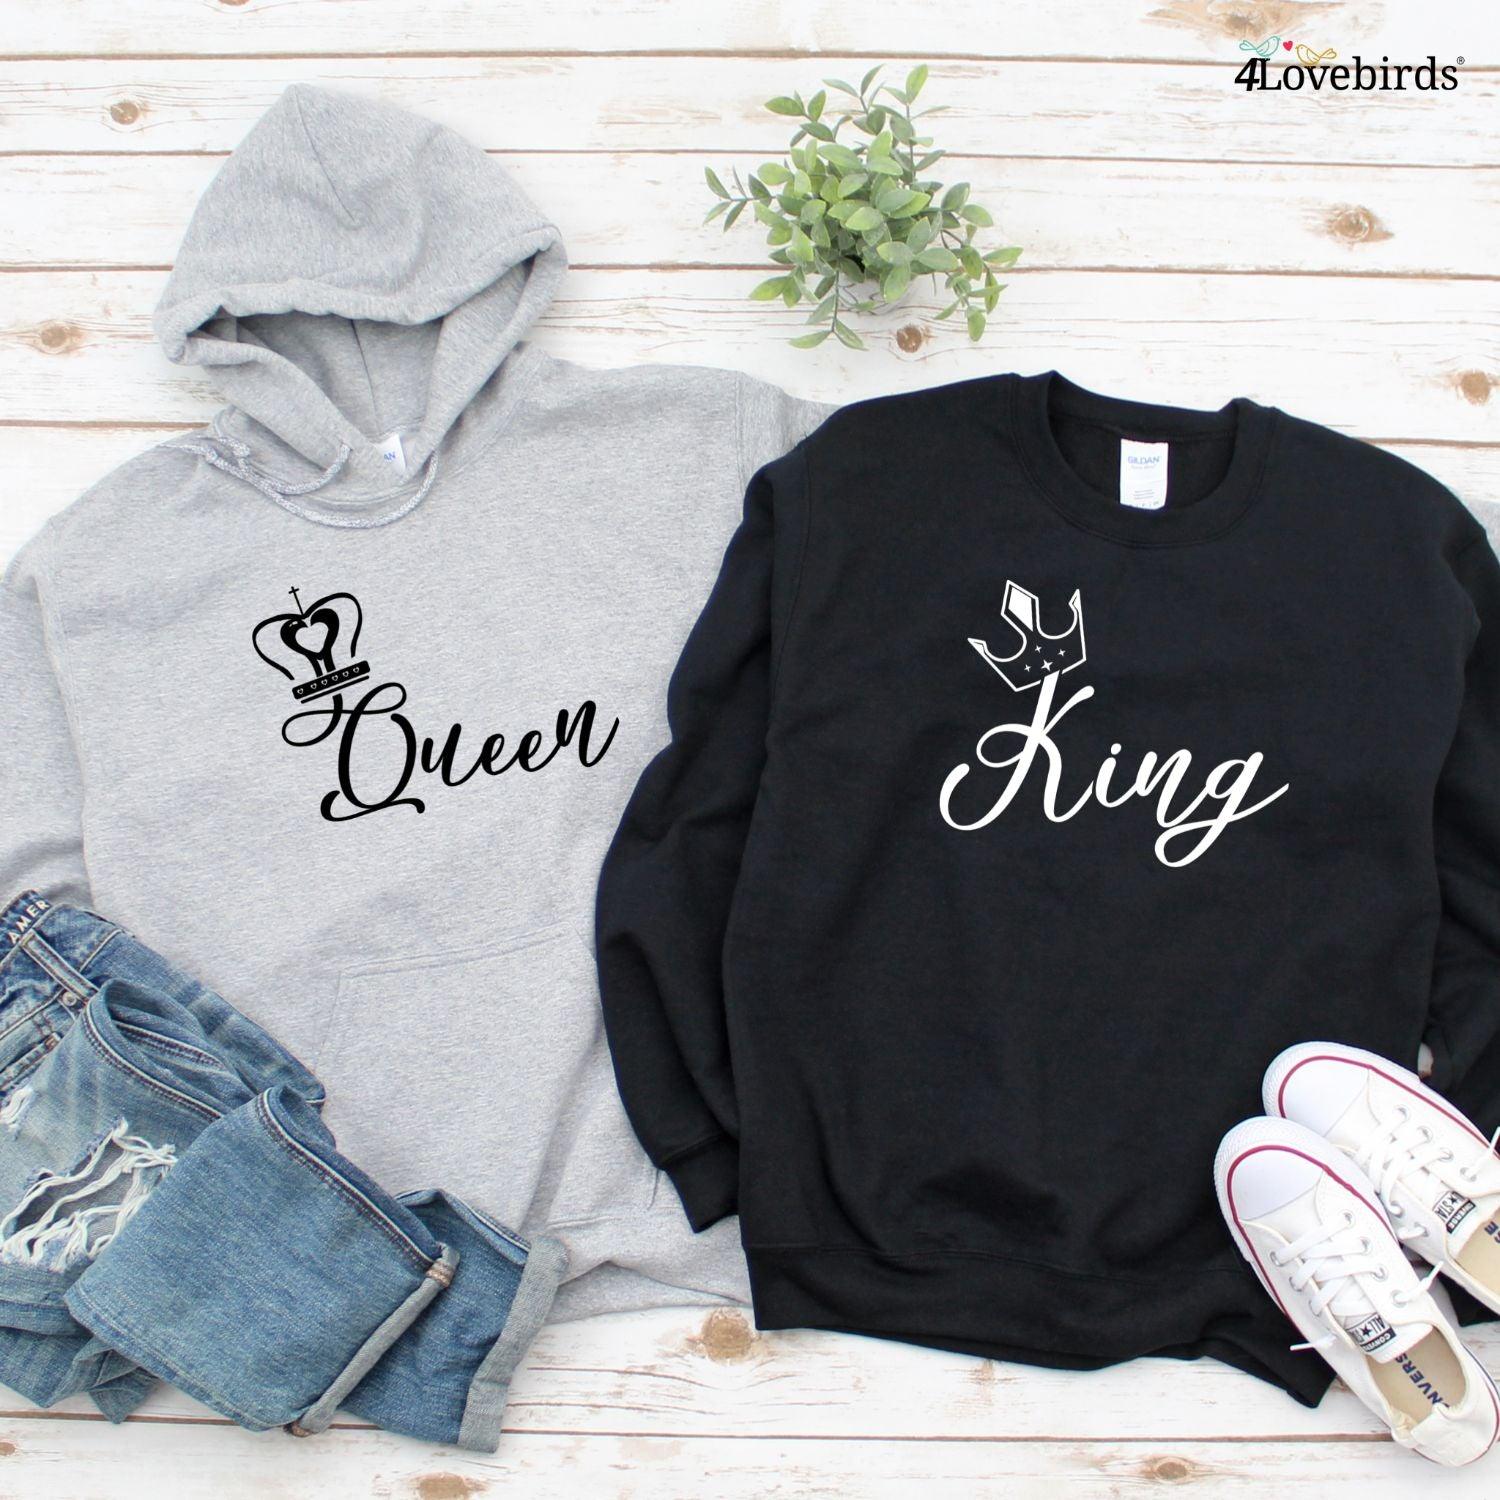 His & Hers Matching Set: King & Queen Couple Outfits & Sweatshirts - 4Lovebirds